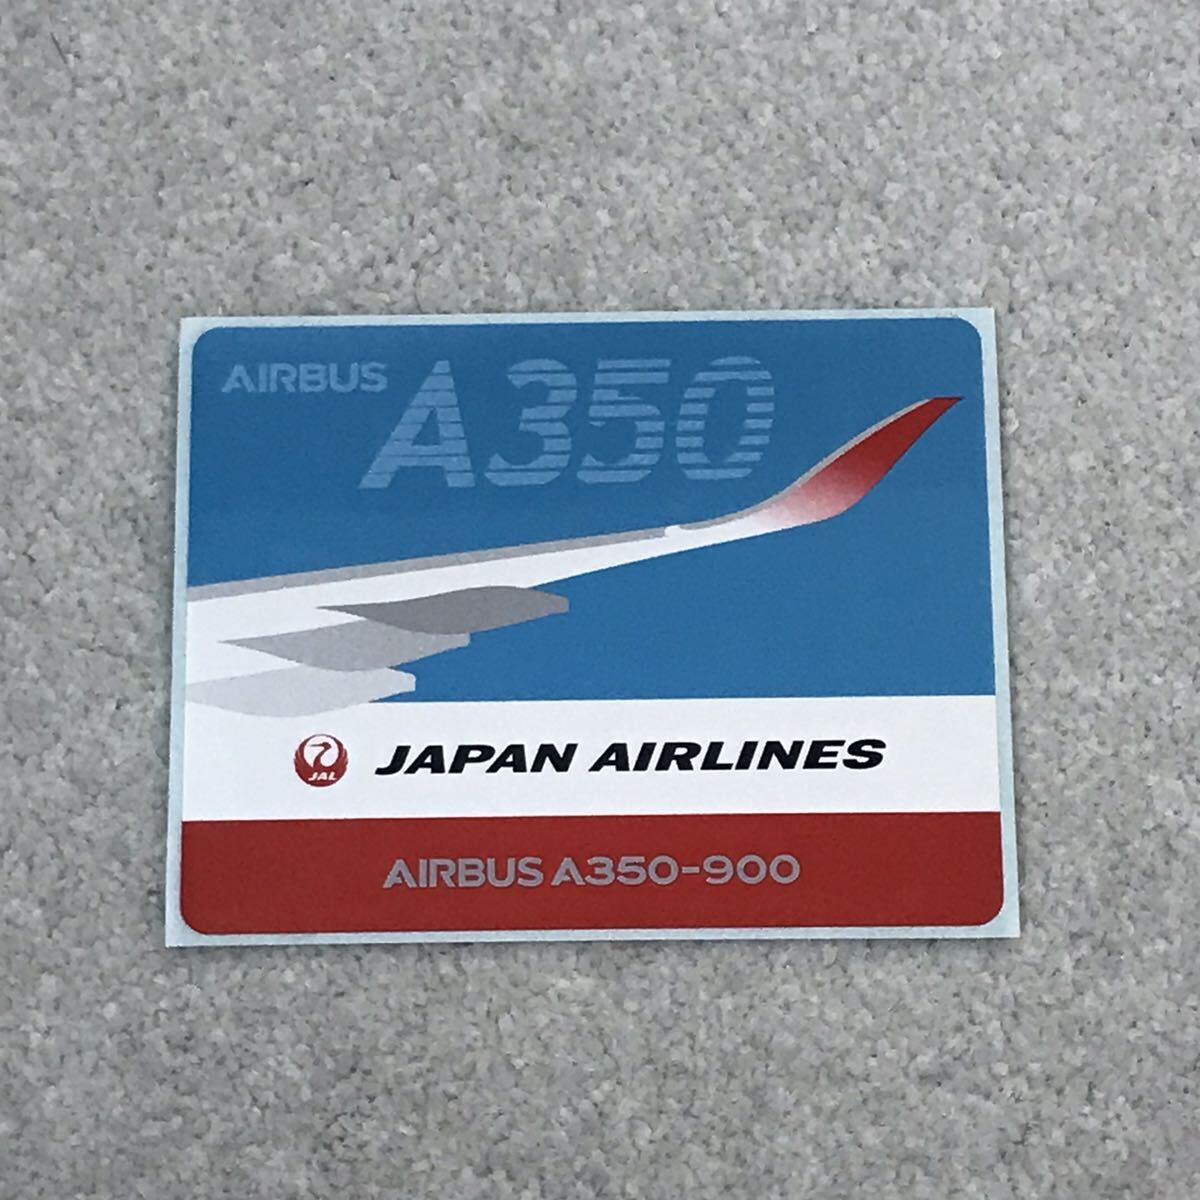 JAL AIRBUS A350 ステッカー  日本航空 エアバス シール 非売品 就航記念 ①の画像1